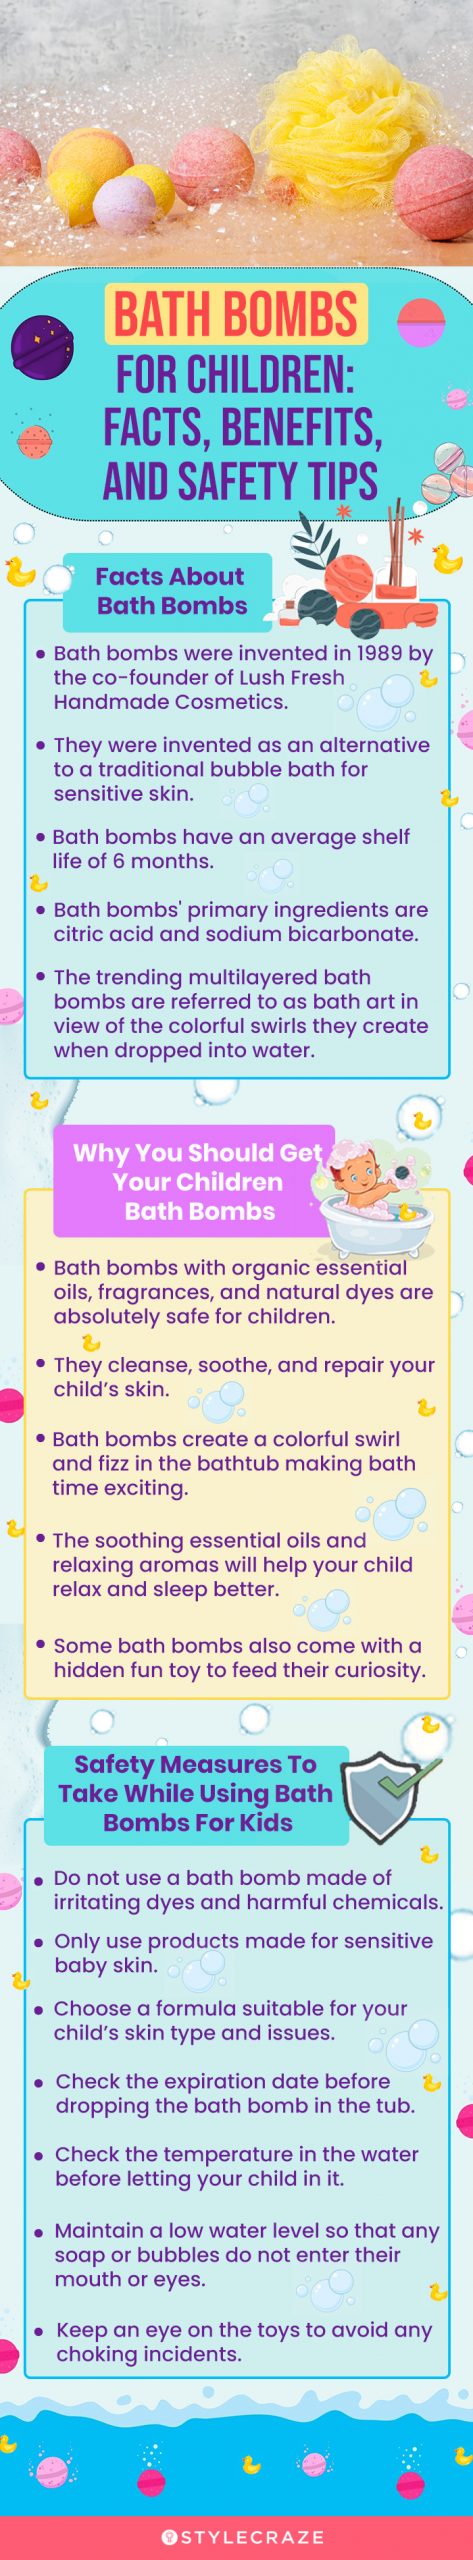 Bath Bombs For Children - Facts, Benefits, And Safety Tips (infographic)